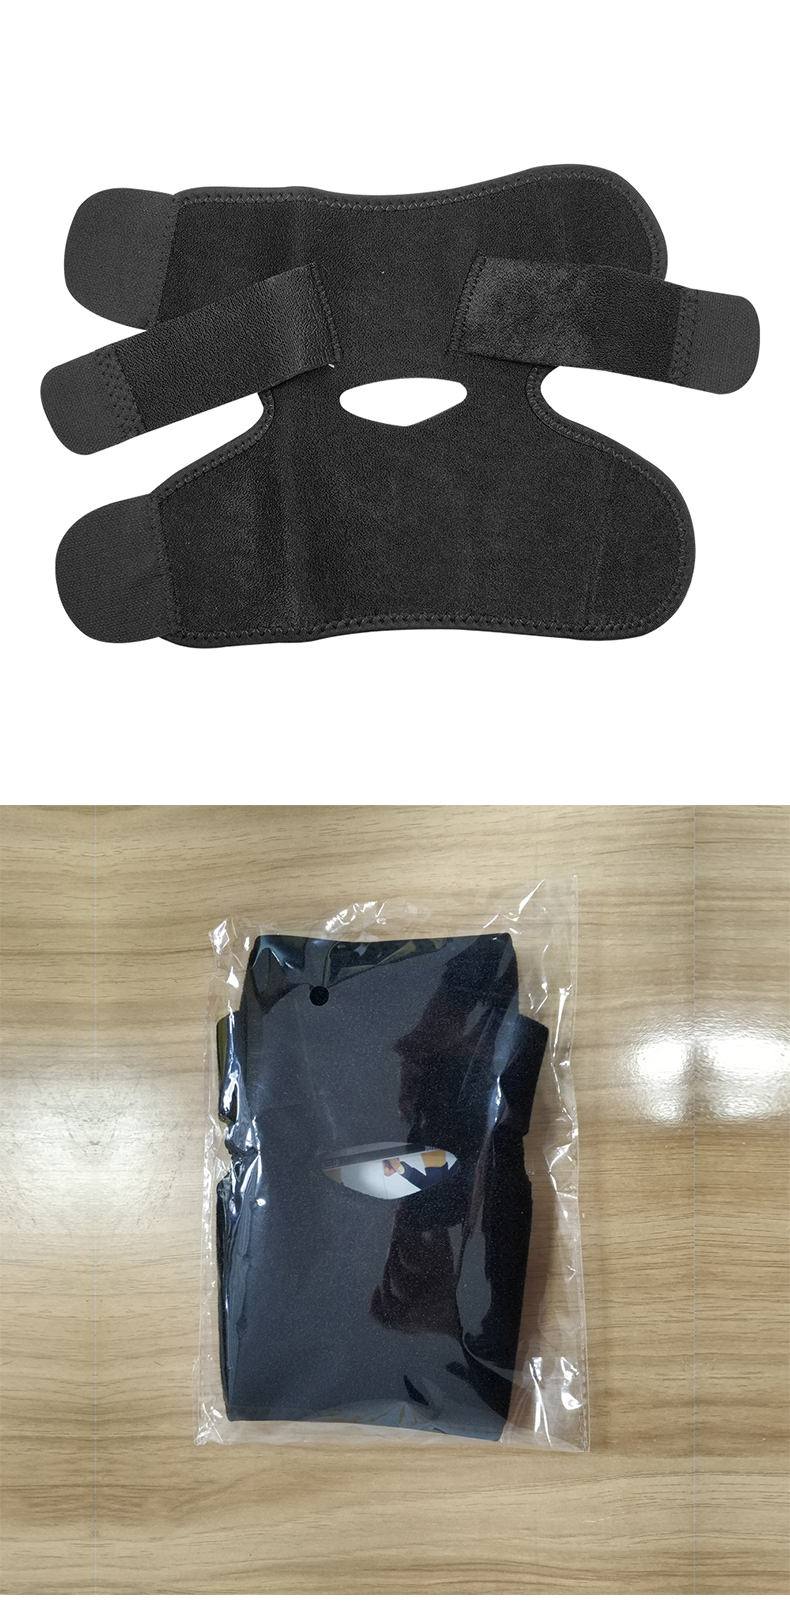 Chanhone China Elastic Sports Ankle Support manufacturers